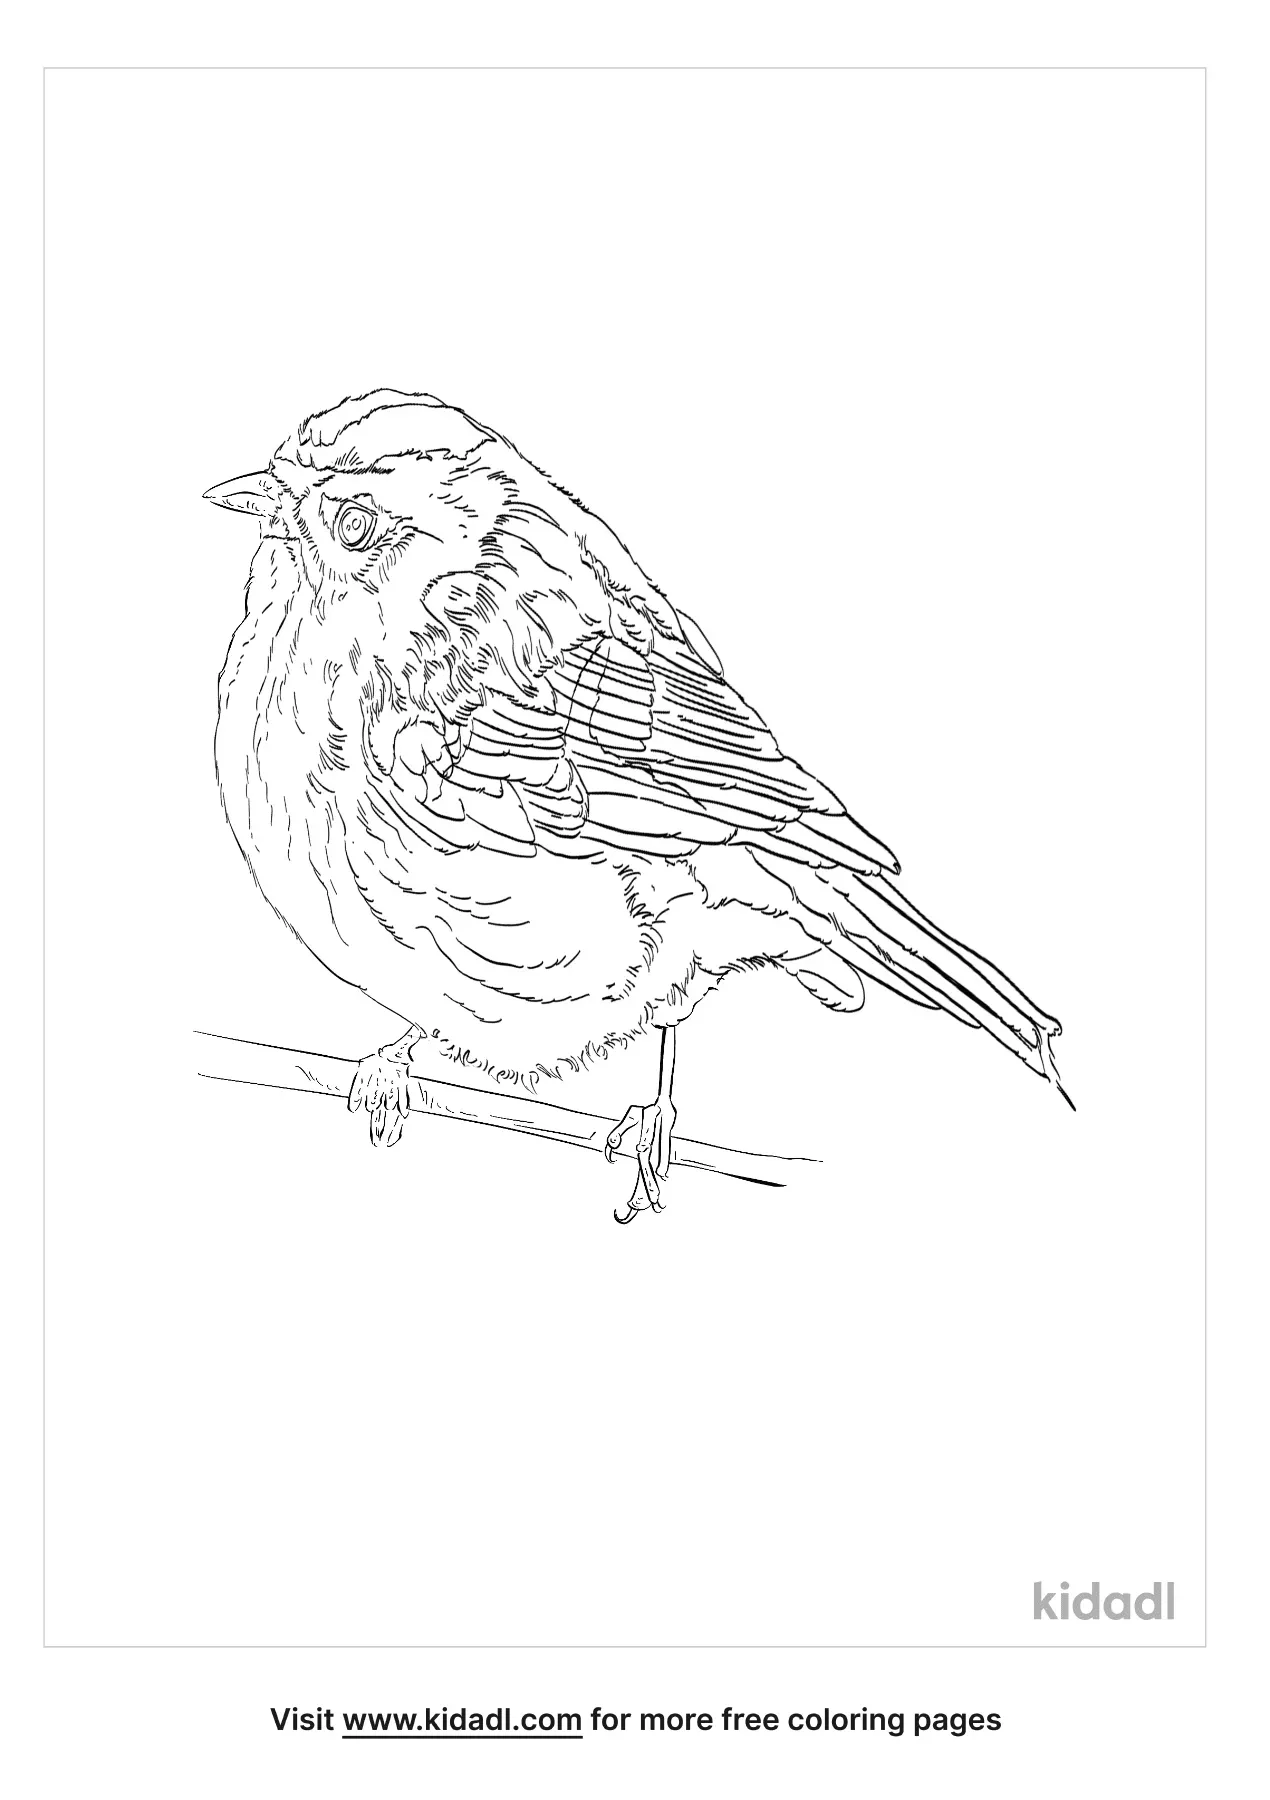 Yellow-Breasted Finch Coloring Page | Free Birds Coloring Page | Kidadl